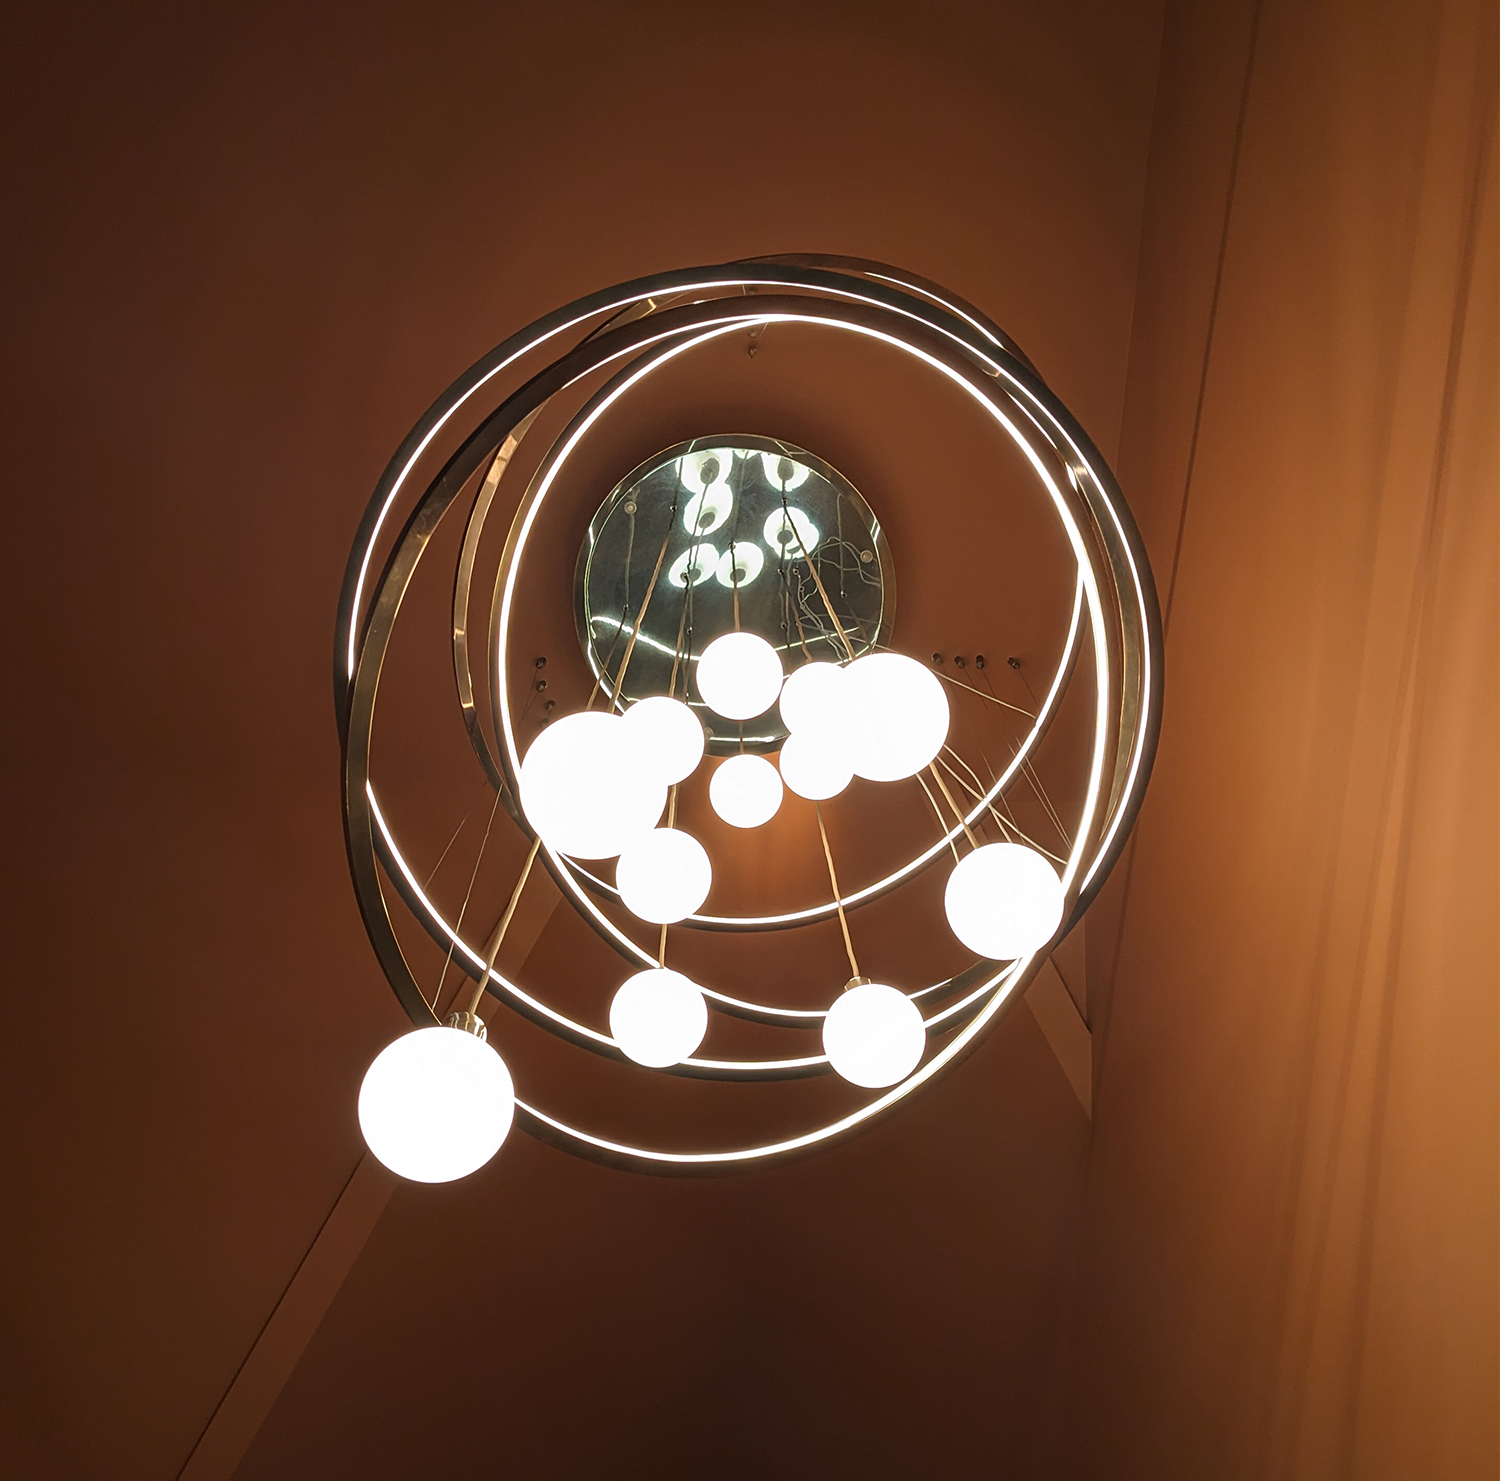 A photo taken from underneath the finished chandelier showing the bulbs and rings.